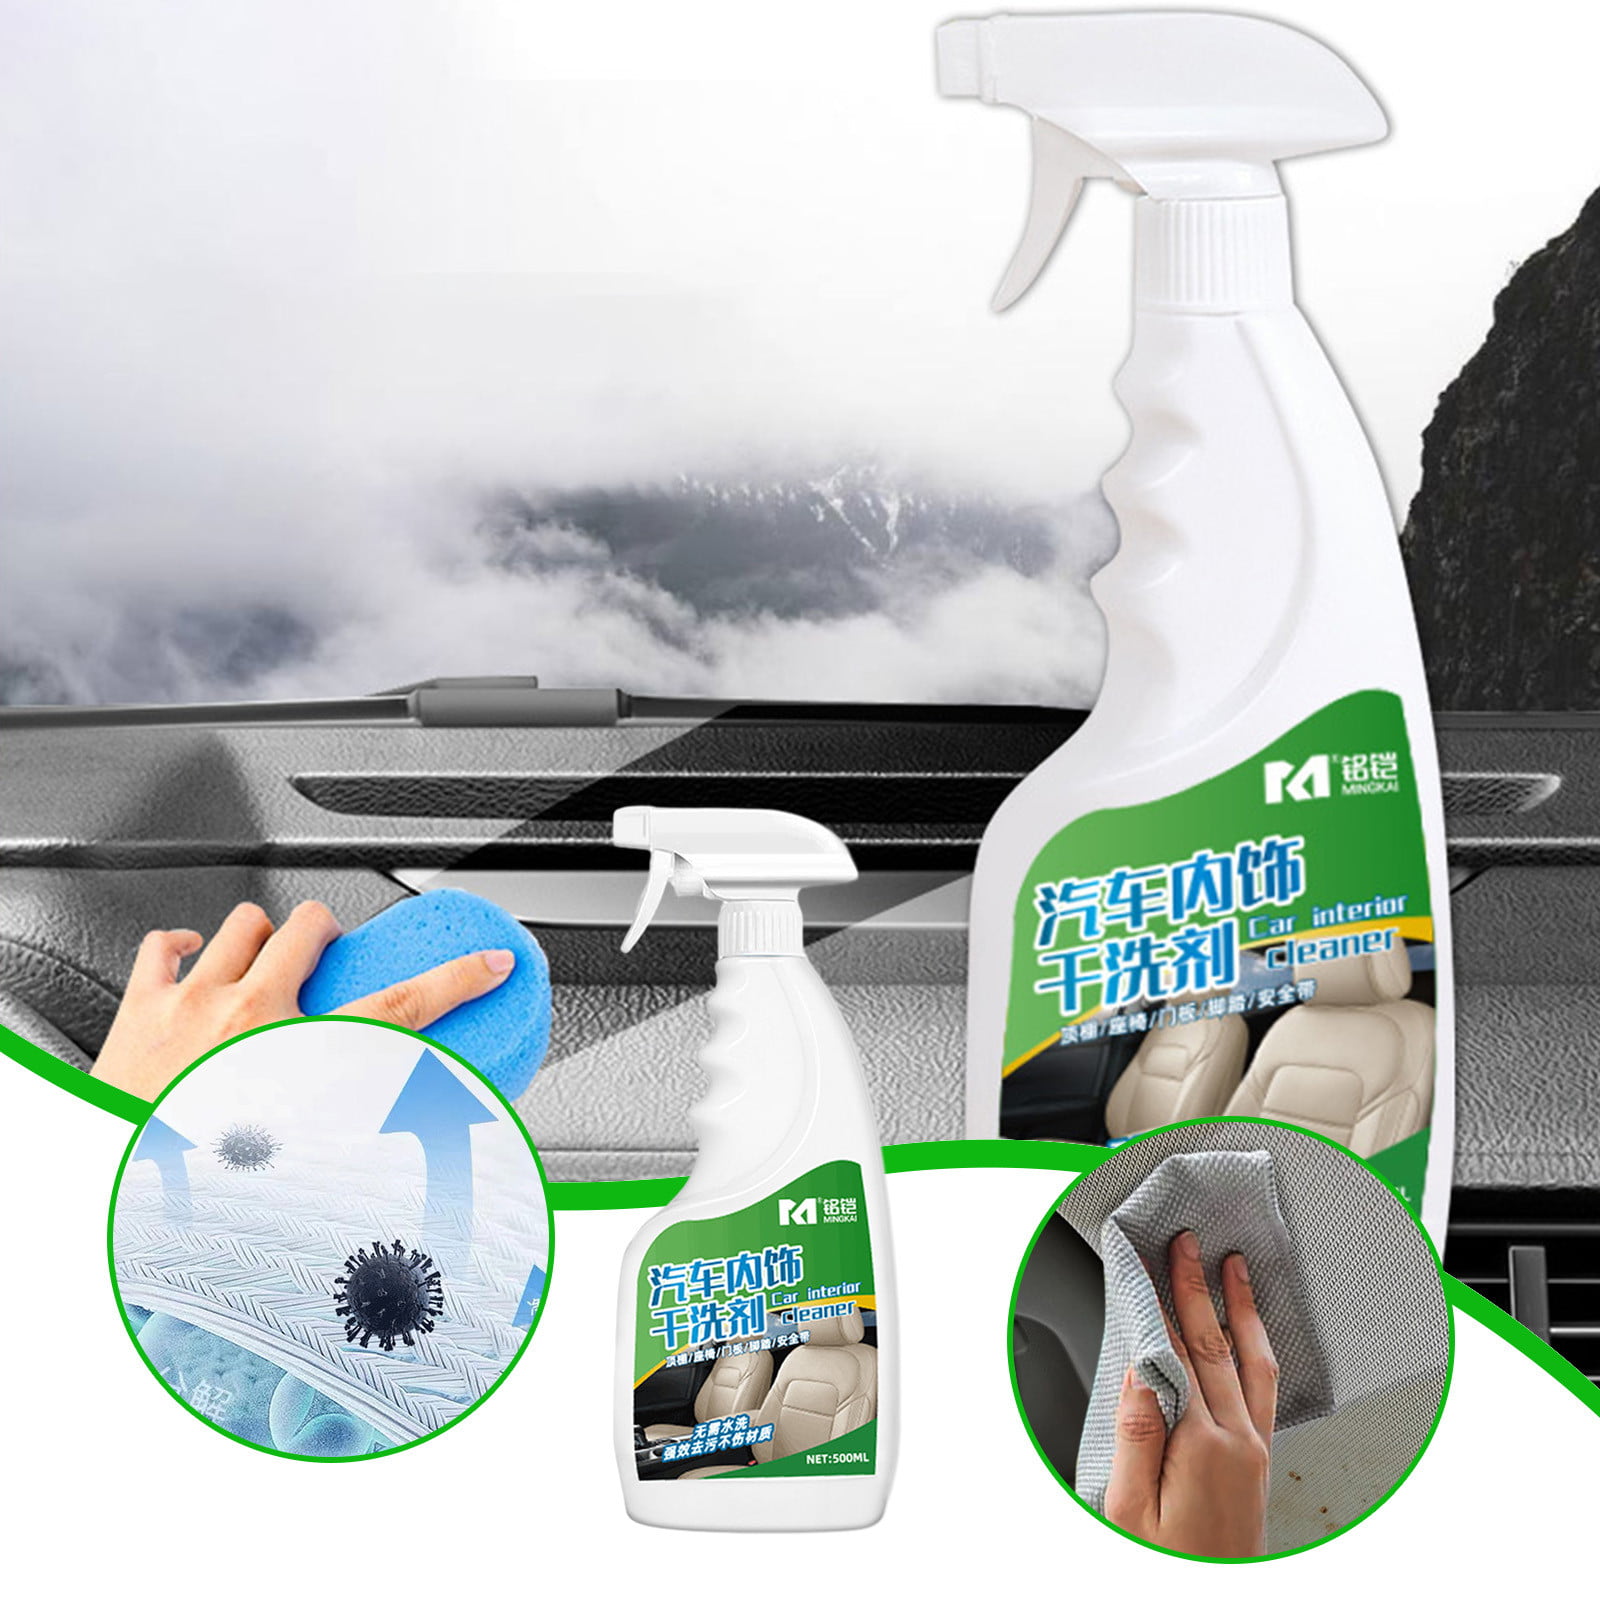  Interior Car Cleaner, 100ml Color Shine Restorer Car Seat  Cleaner, Deep Easy Clean Interior Car Cleaner, User Friendly Lightweight  Cat Stain Remover, Flexible Car Fabric Cleaner for Carpets Interior :  Automotive